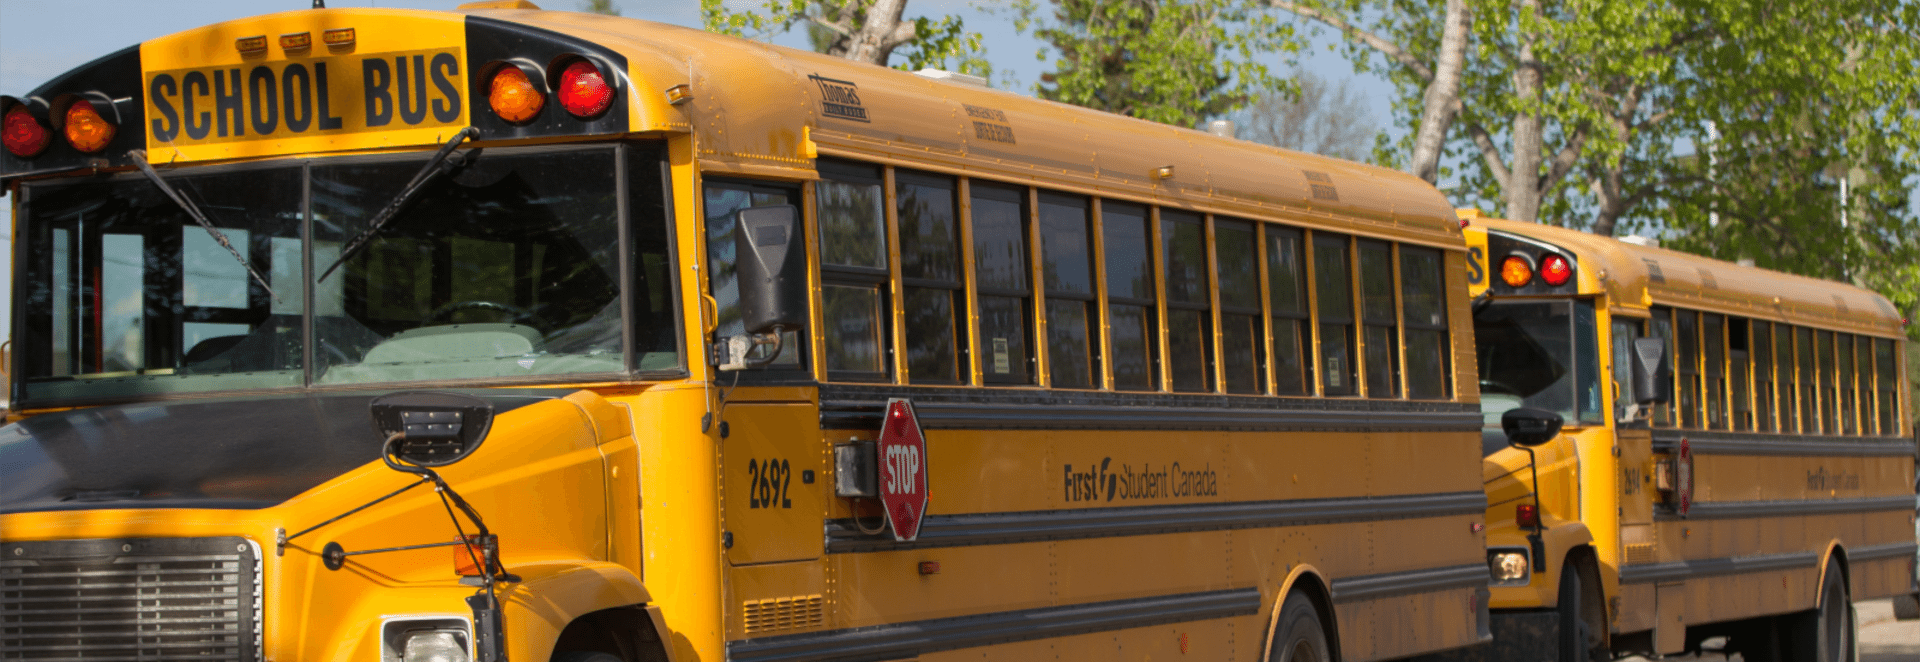 City school bus review to consult local school boards and bus companies